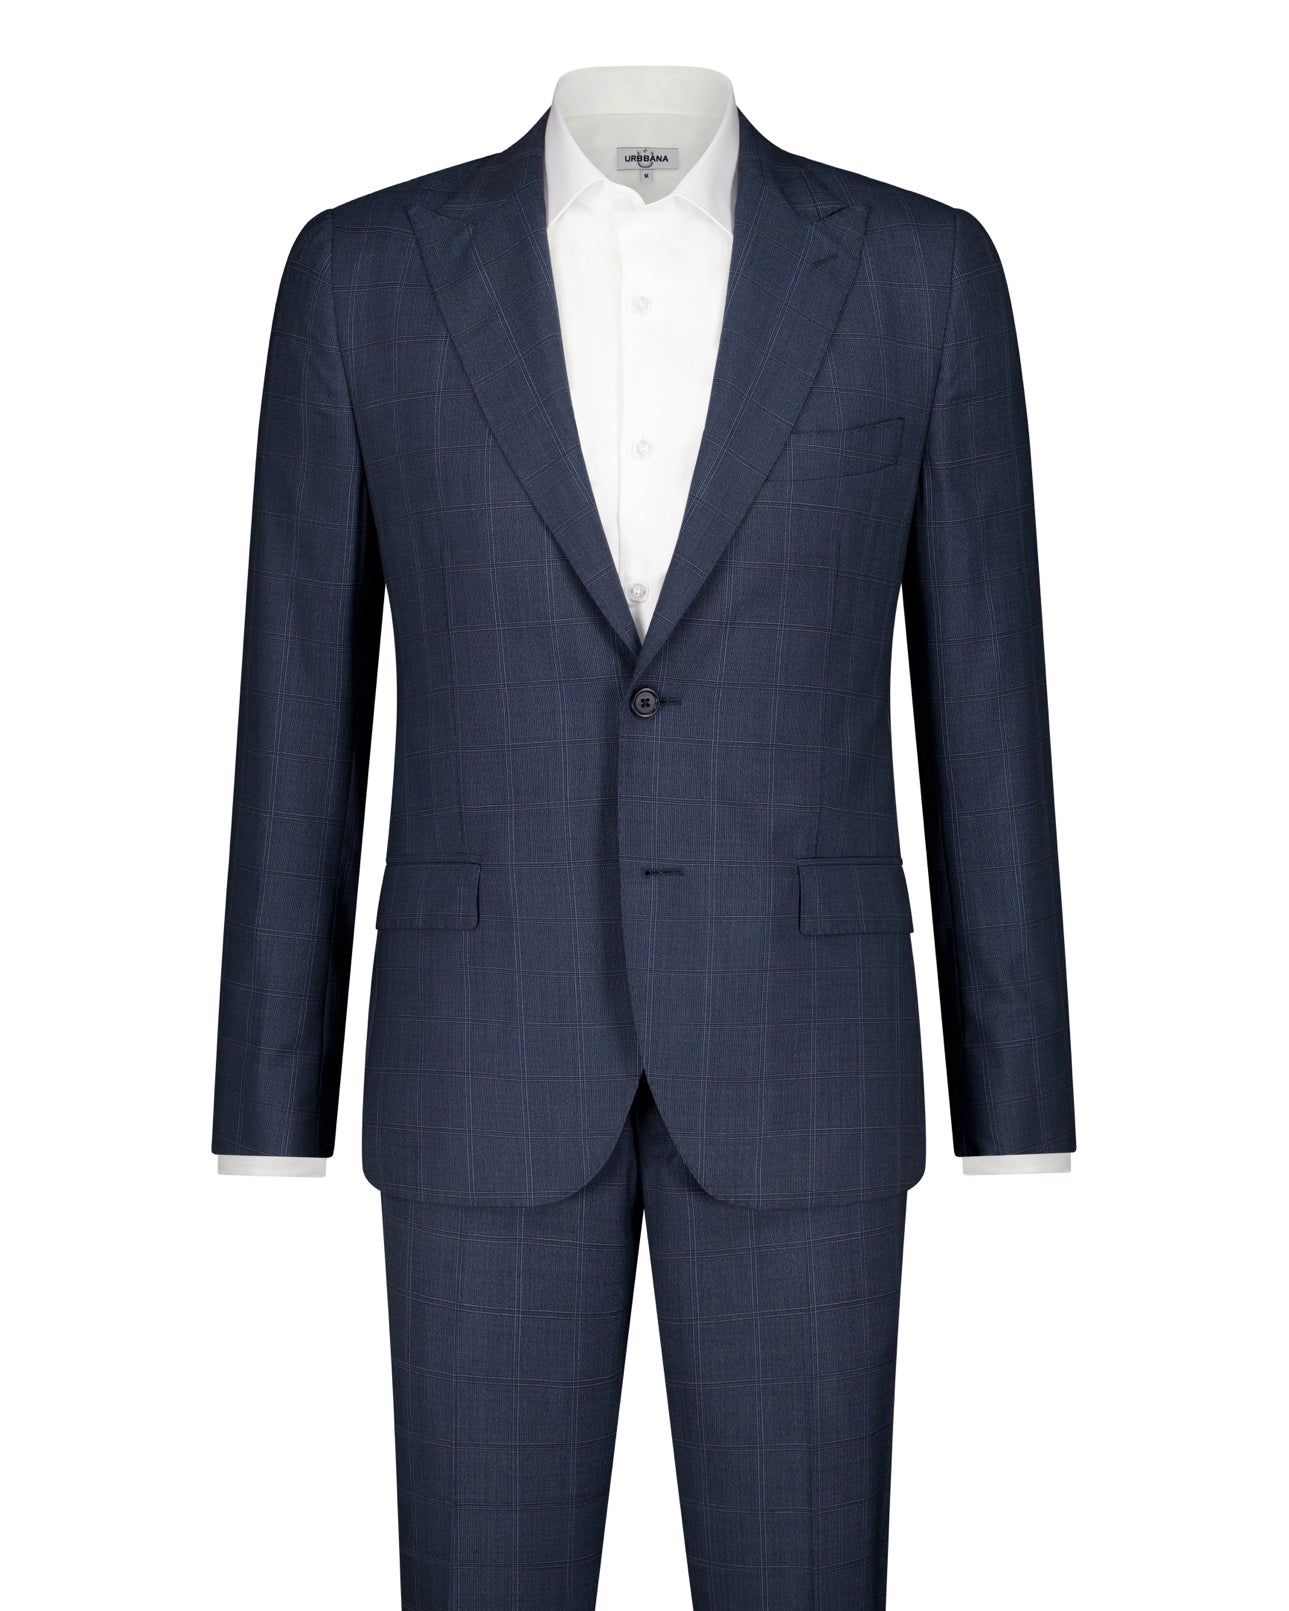 Bateman Zegna Cloth Suit - Navy - Made in Italy